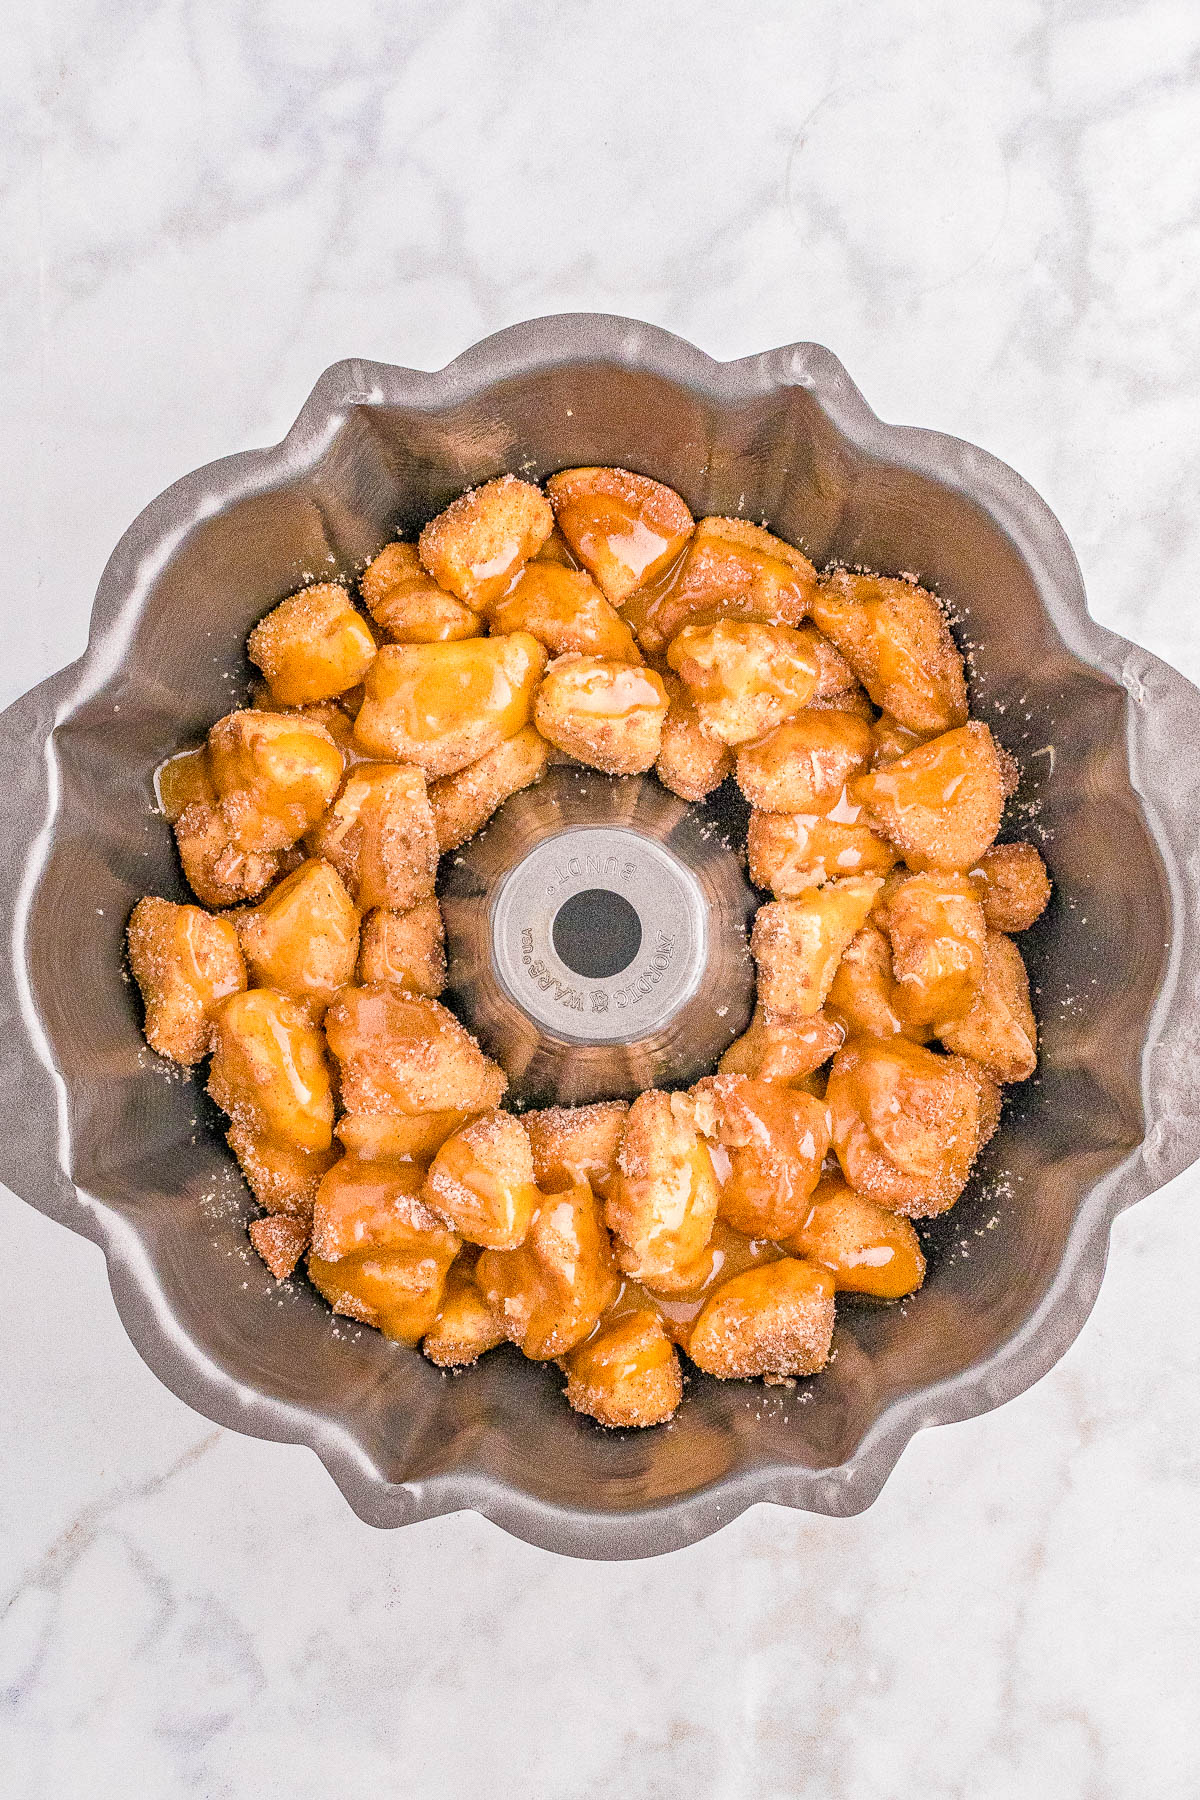 Caramel-glazed monkey bread pieces arranged in a circular fluted tube pan on a marble surface.